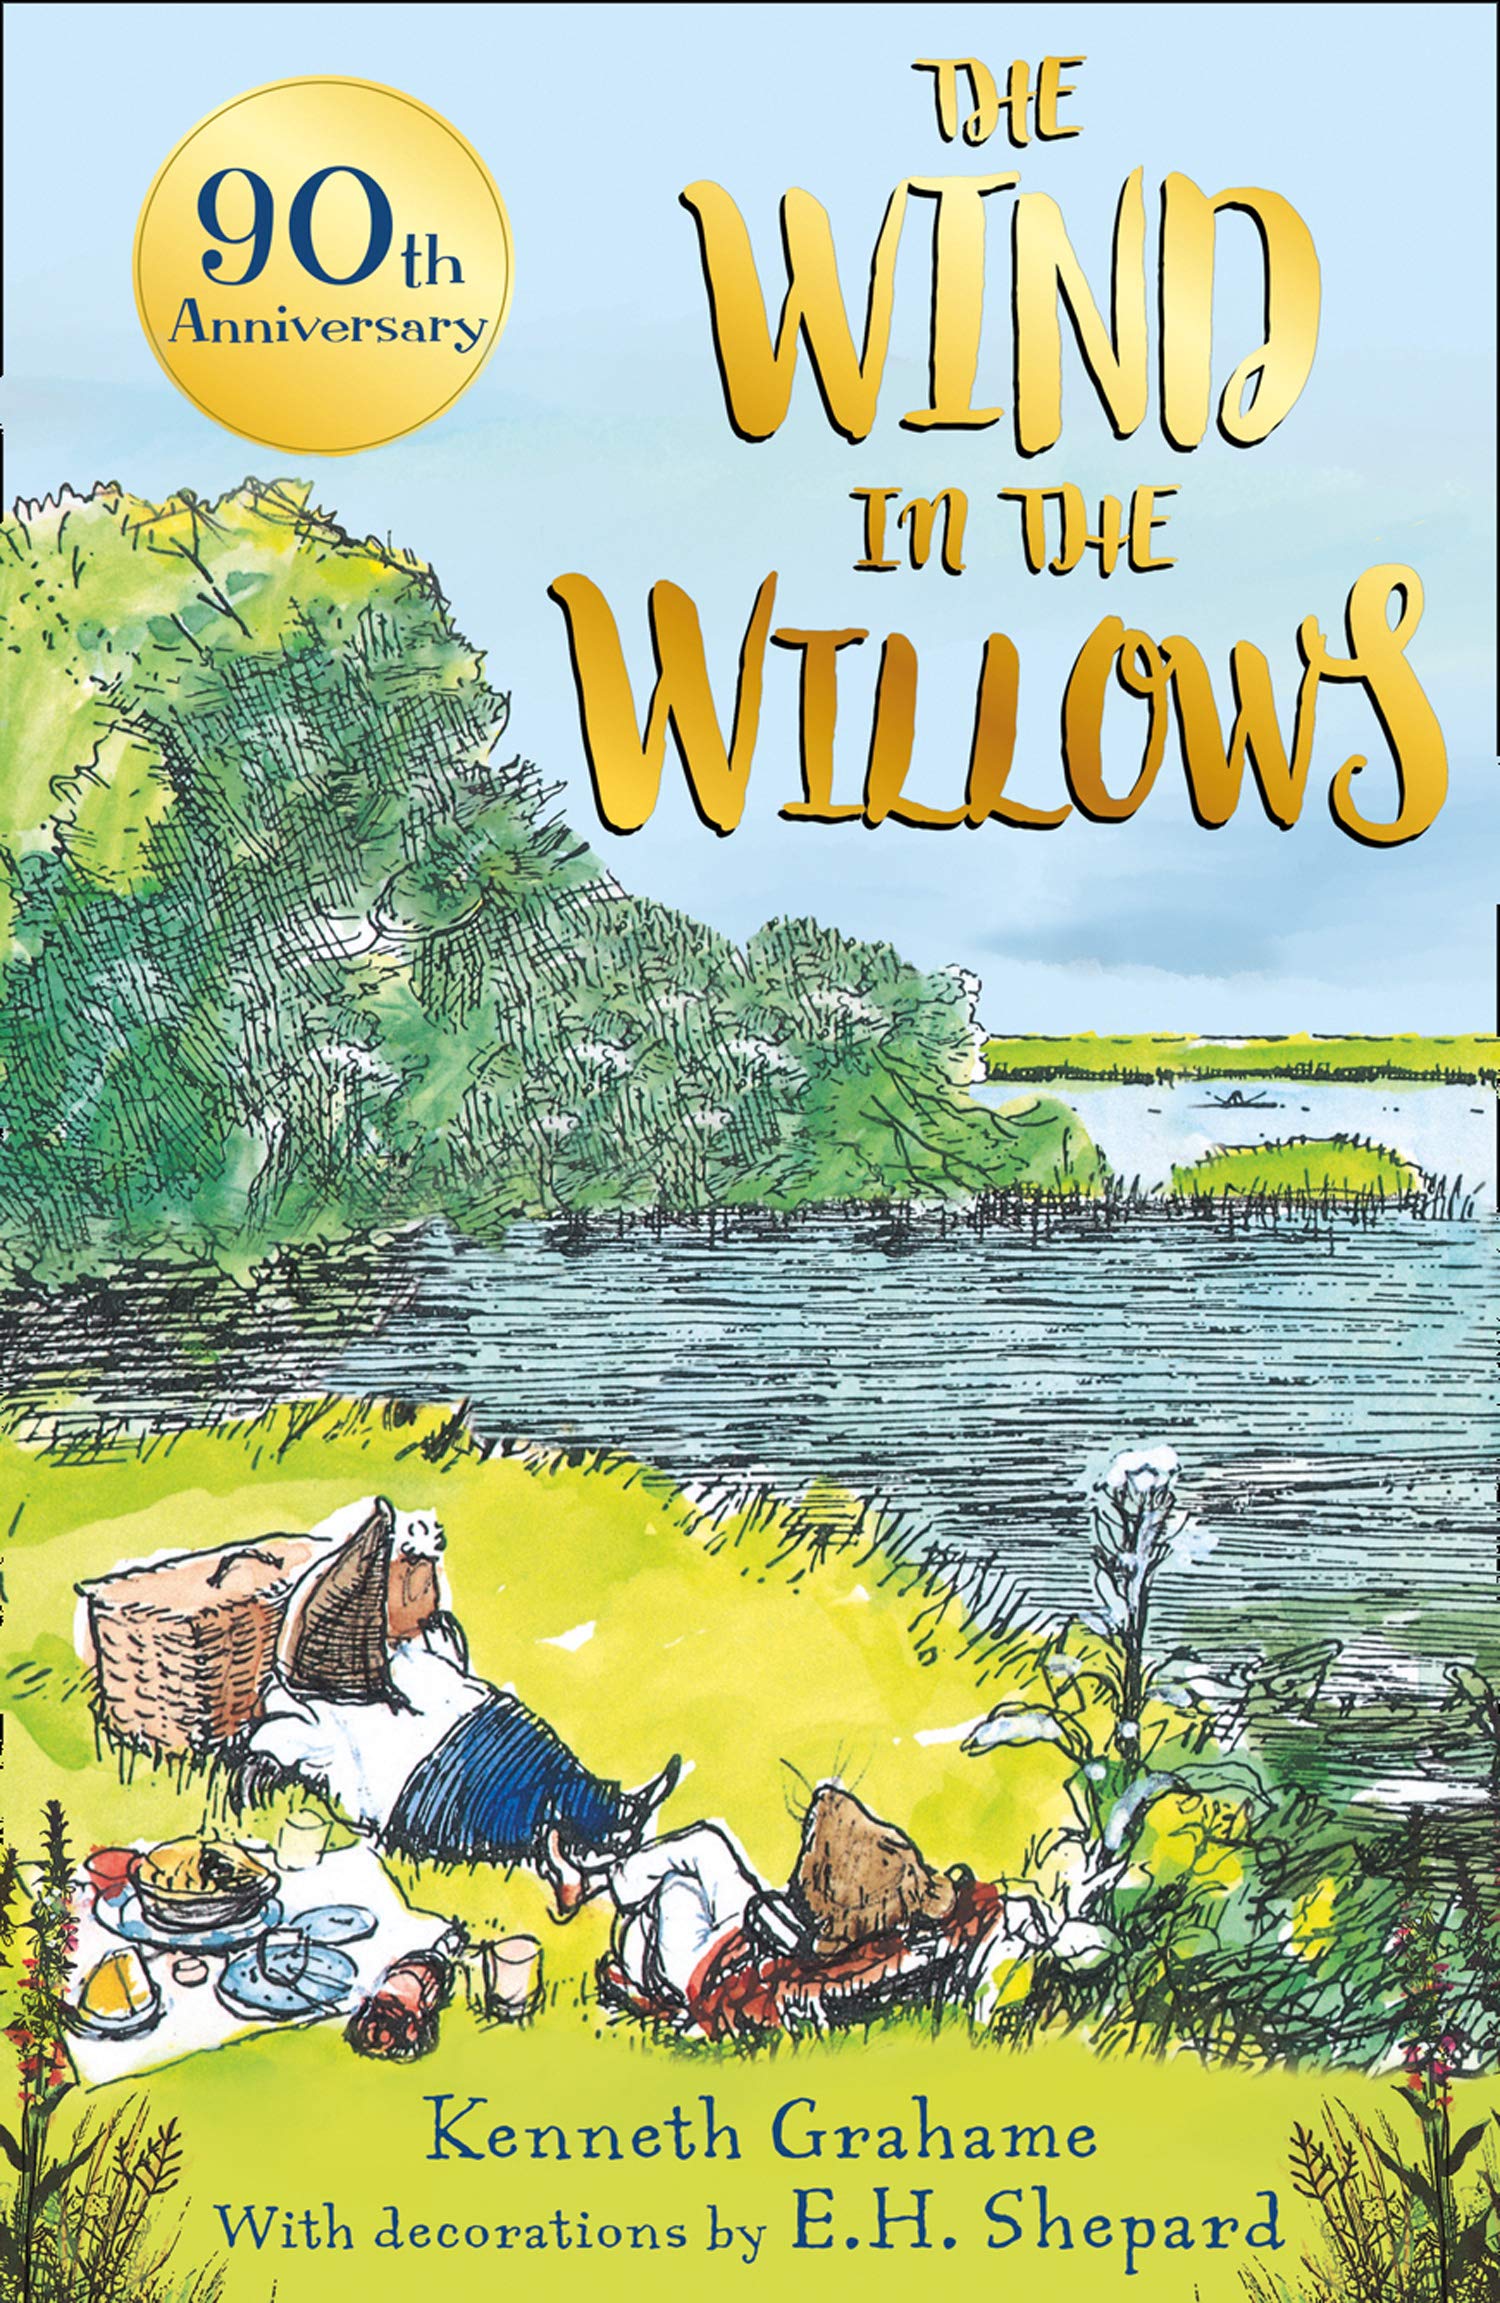 Wind in the Willows - 90th anniversary gift edition | Kenneth Grahame